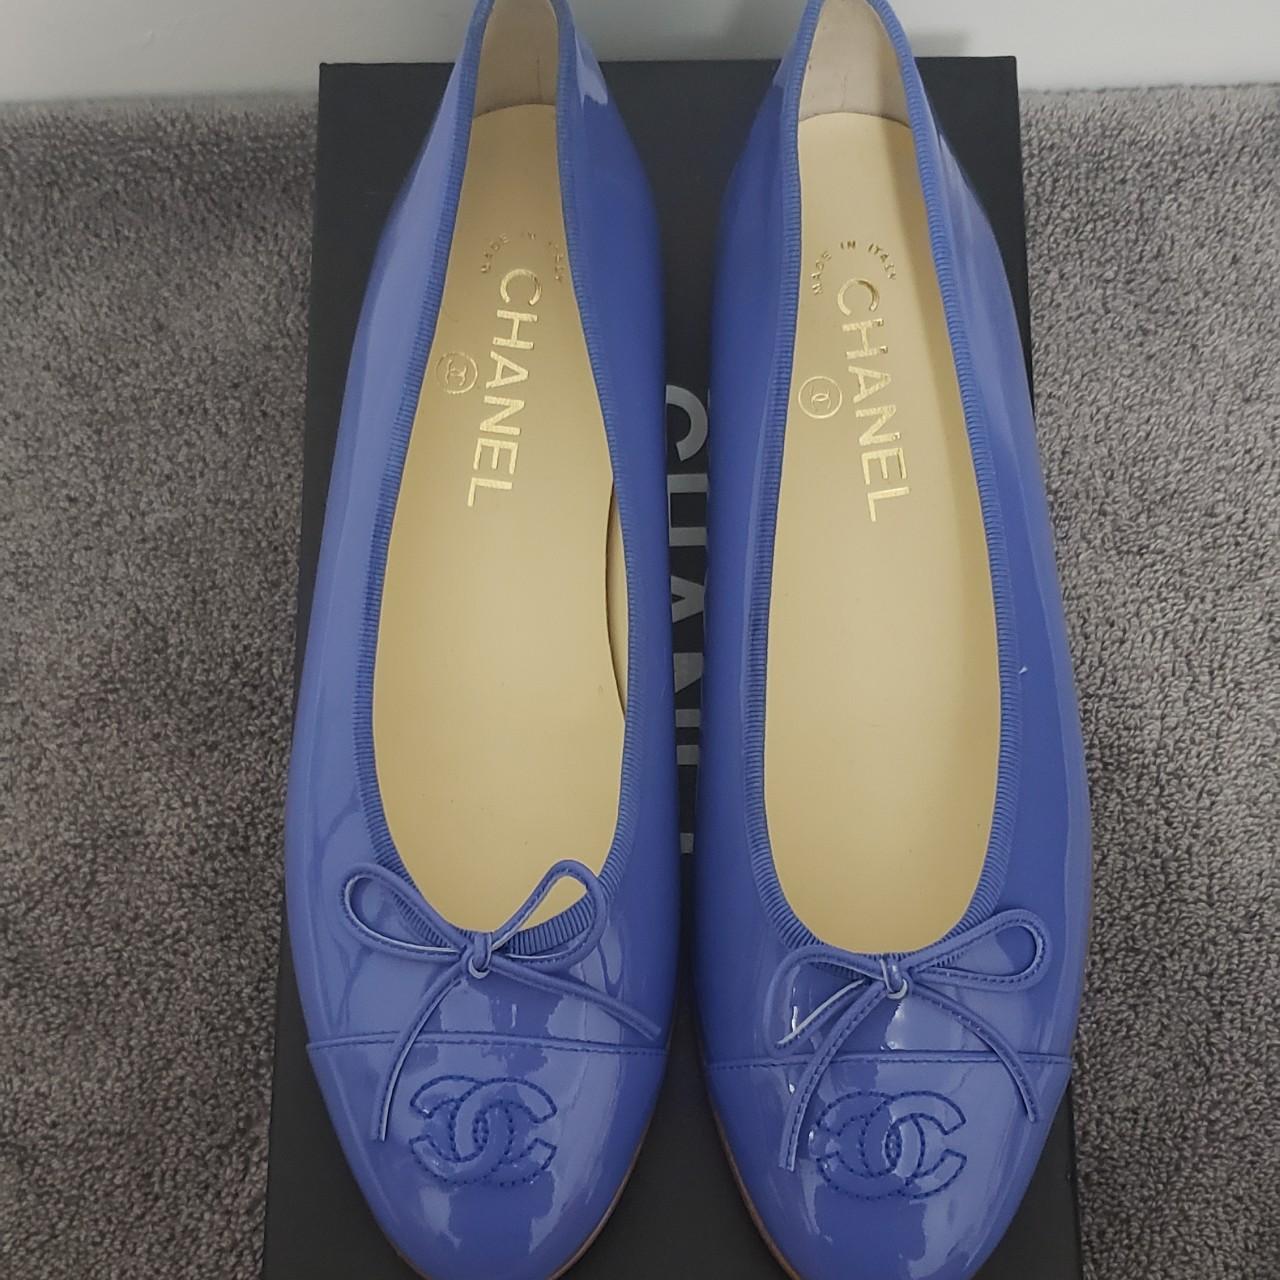 Blue Patent Leather Chanel Ballerina Flats in size